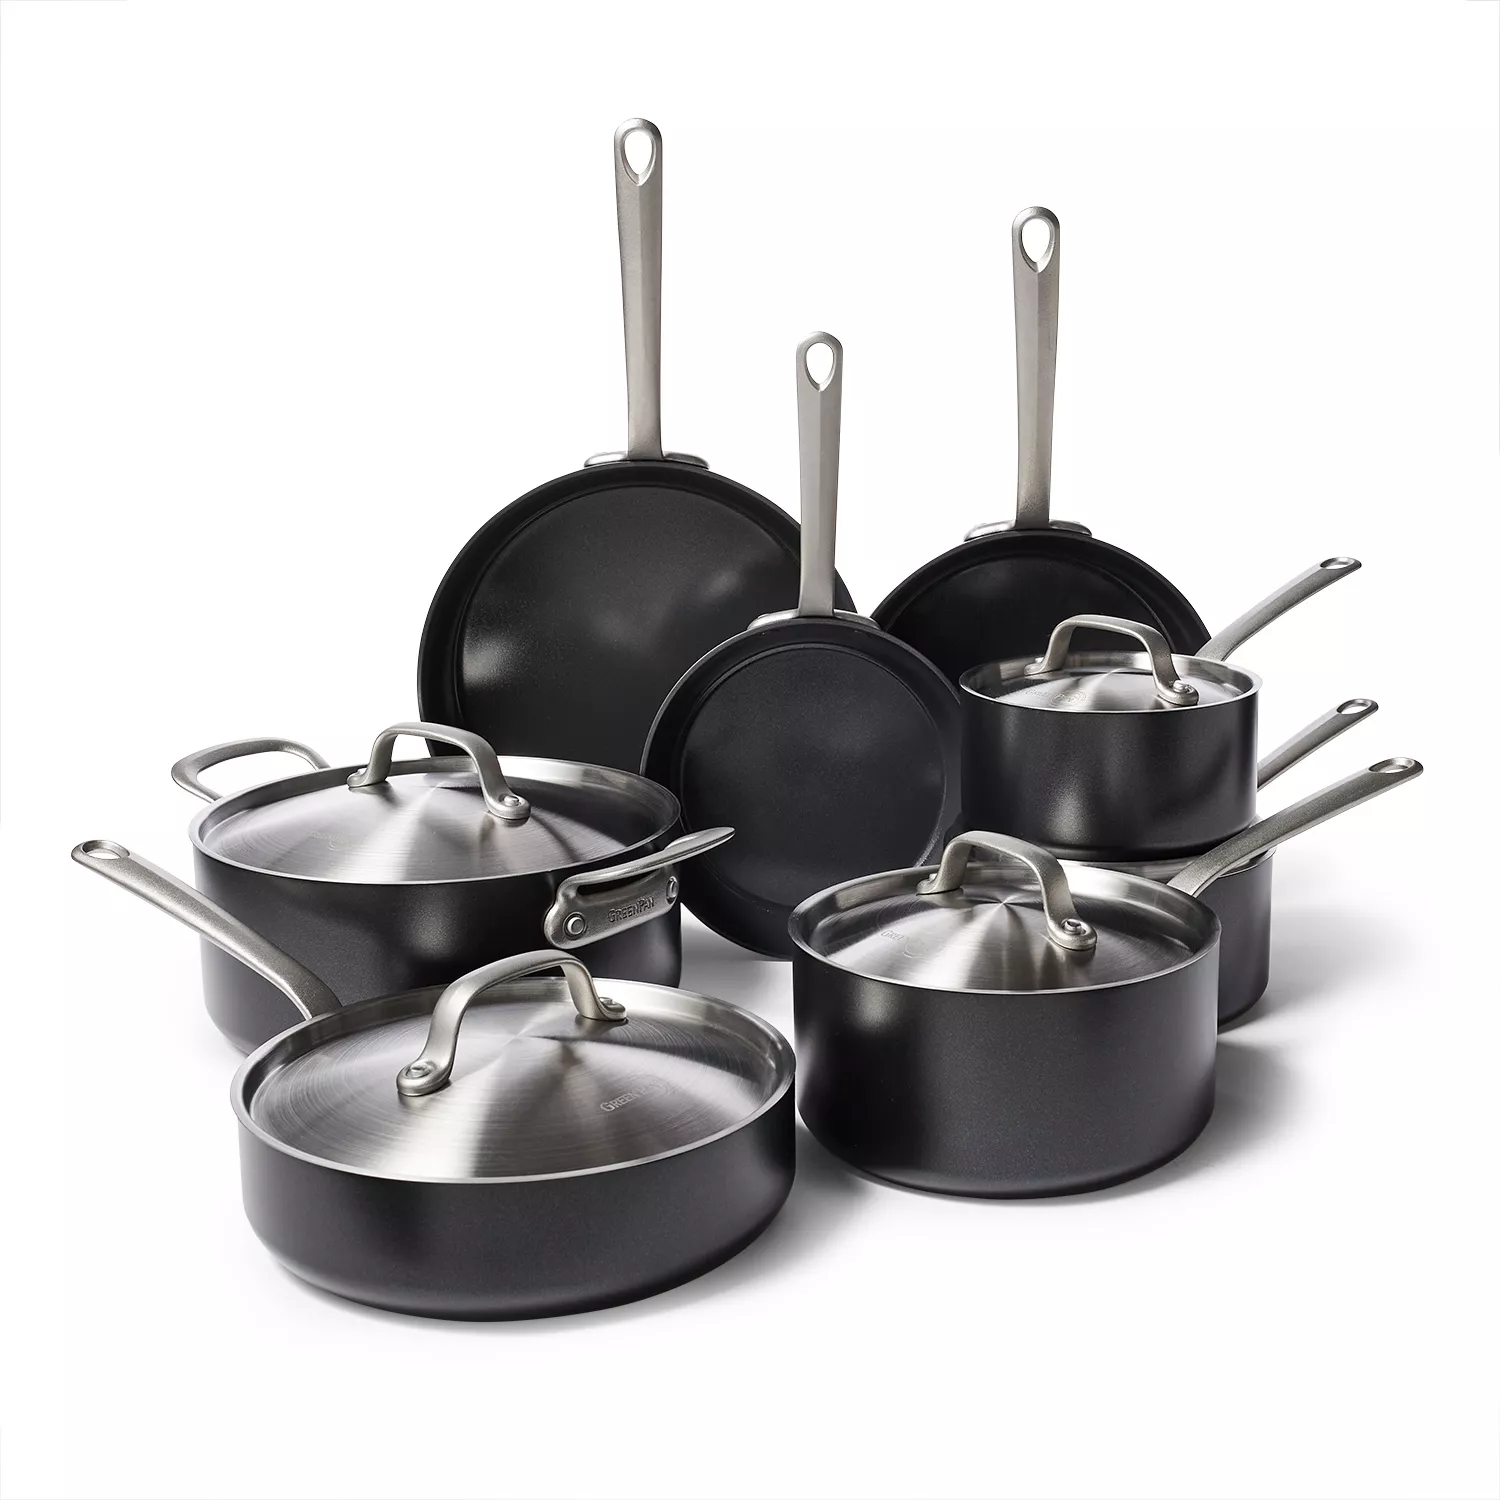 13 Piece Cookware Set With Lids